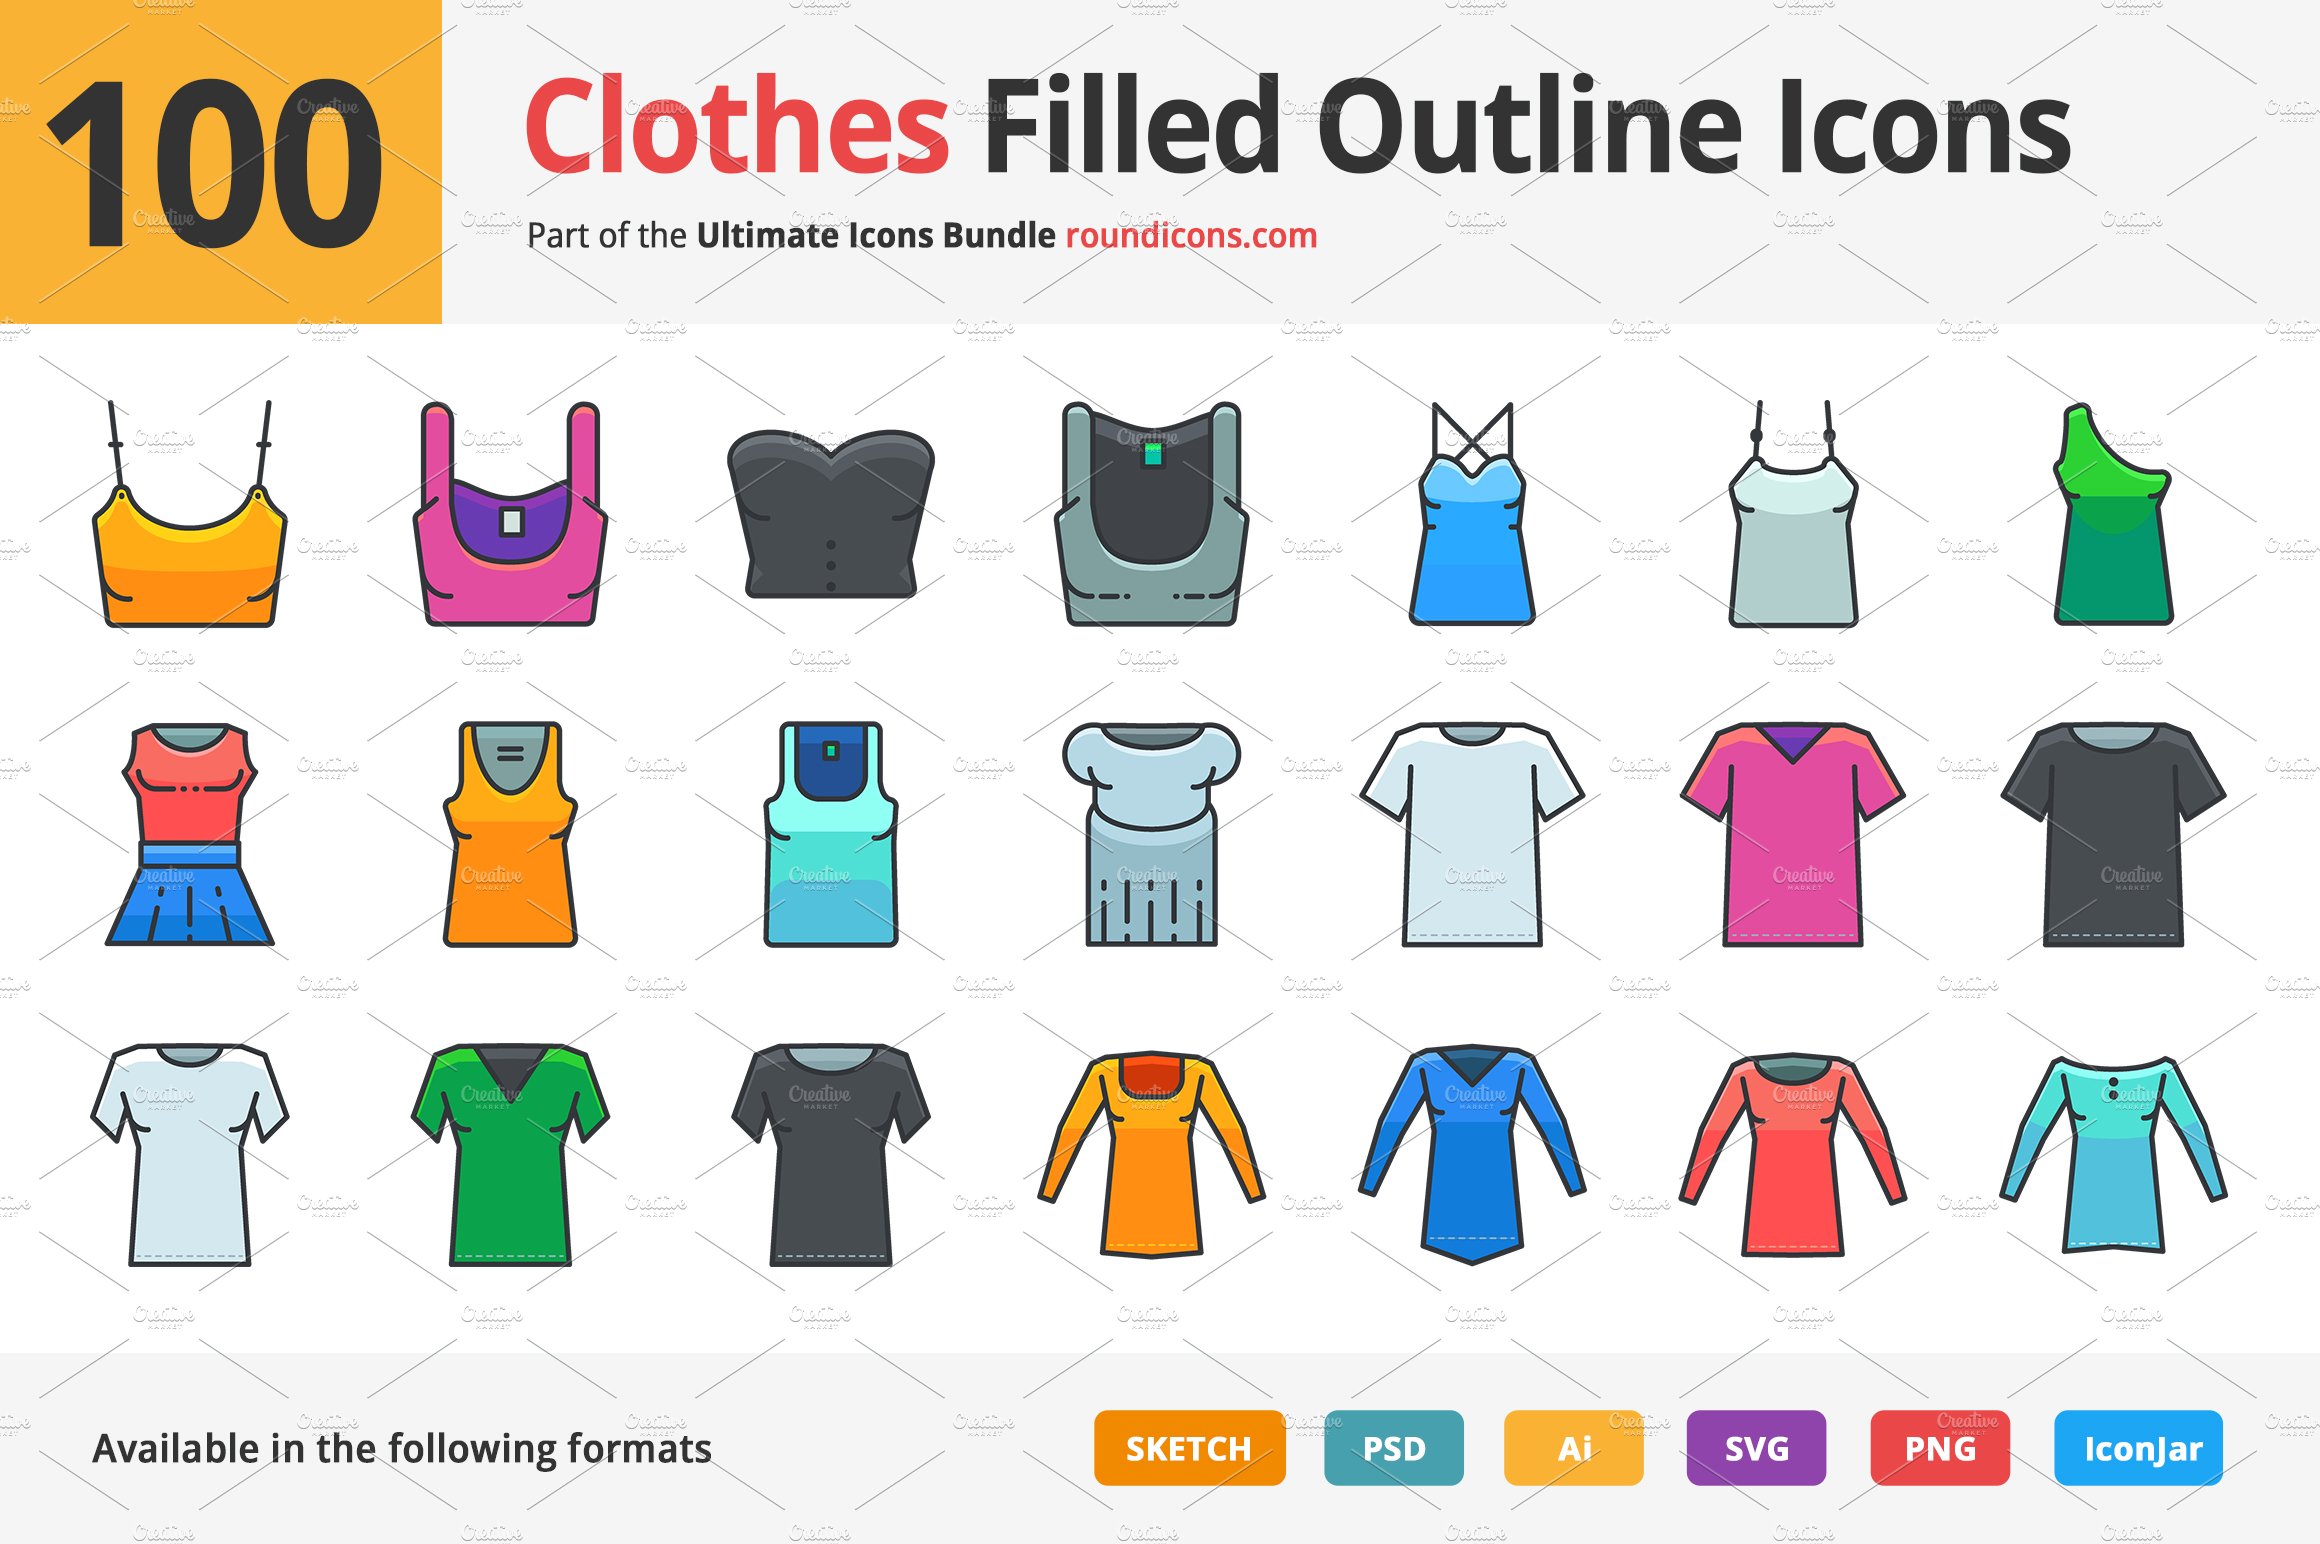 100 Clothes Filled Outline Icons cover image.